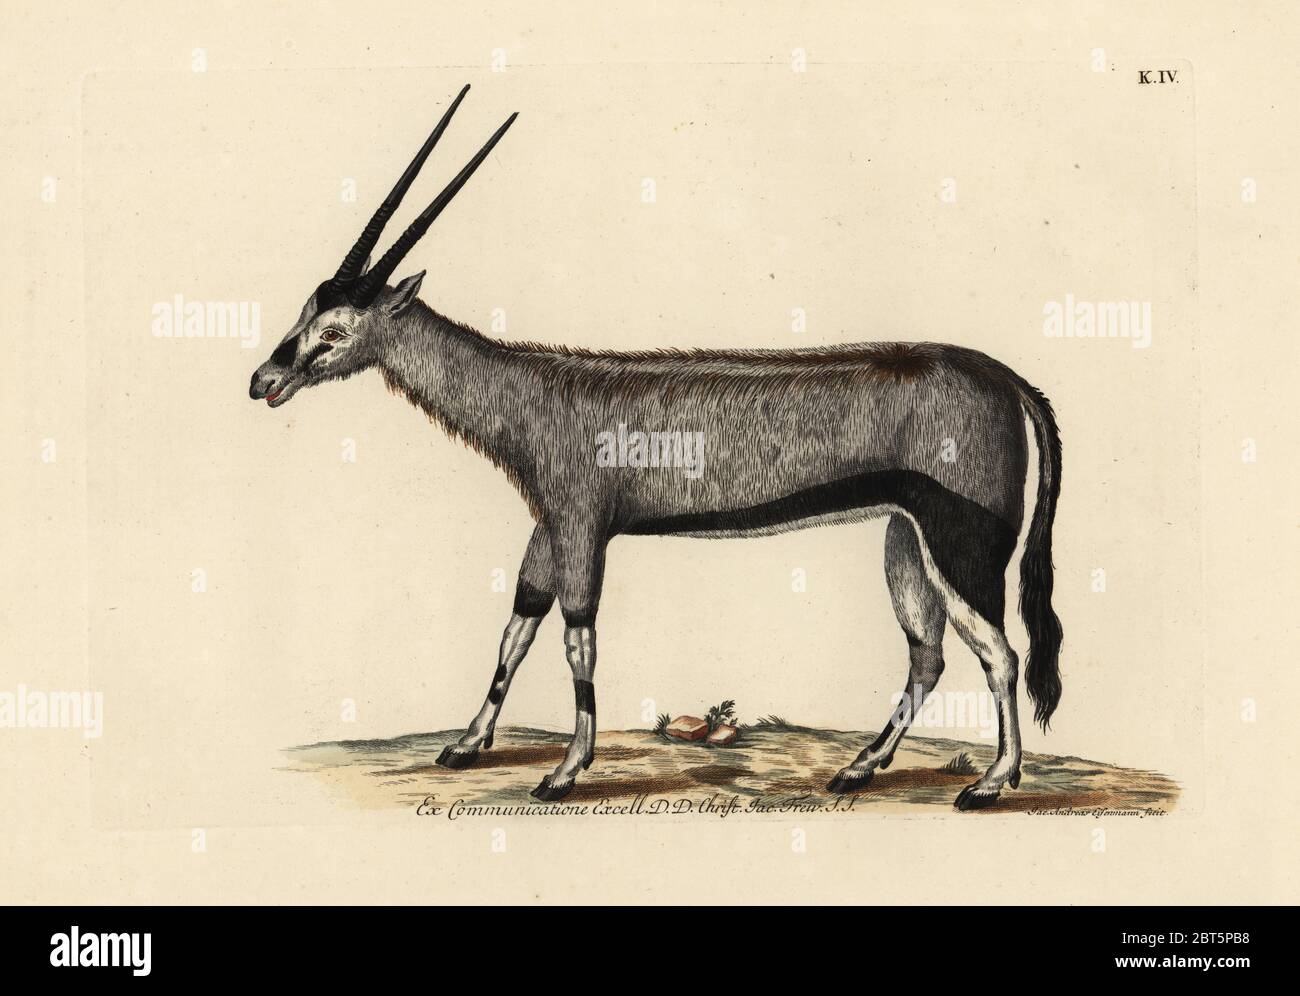 Gemsbok or gemsbuck, Oryx gazella (Chamois d'Afrique). Handcoloured copperplate engraving by Jakob-Andreas Eisemann from Georg Wolfgang Knorr's Deliciae Naturae Selectae of Kabinet van Zeldzaamheden der Natuur, Blusse and Son, Nuremberg, 1771. Specimens from a Wunderkammer or Cabinet of Curiosities owned by Dr. Christoph Jacob Trew in Nuremberg. Stock Photo